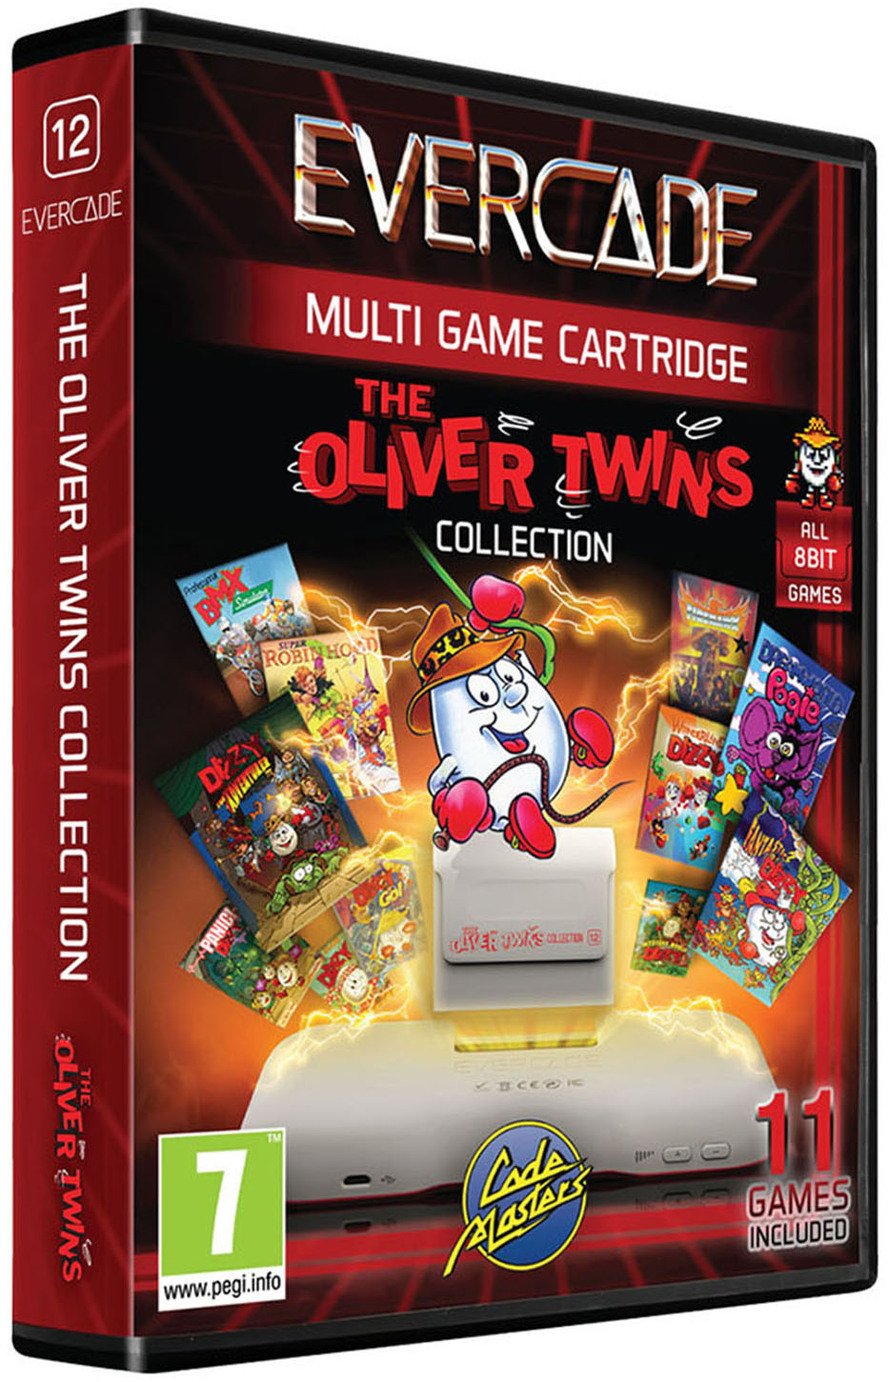 Blaze Evercade Cartridge Oliver Twins Collection 1 Pre-Order Review